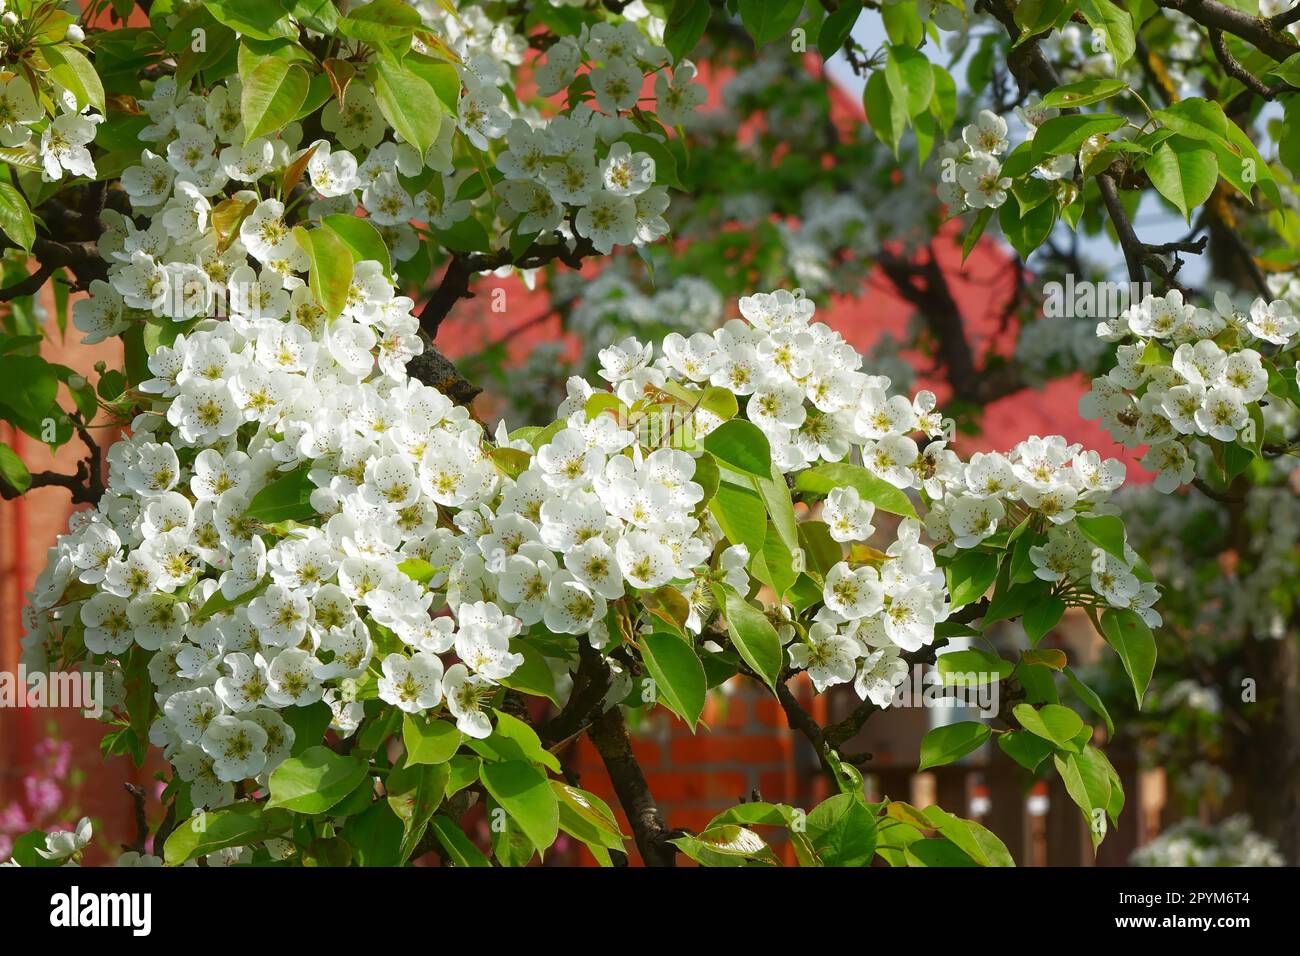 A cluster of white flowers of Harbin pear, Pyrus ussuriensis. Stock Photo